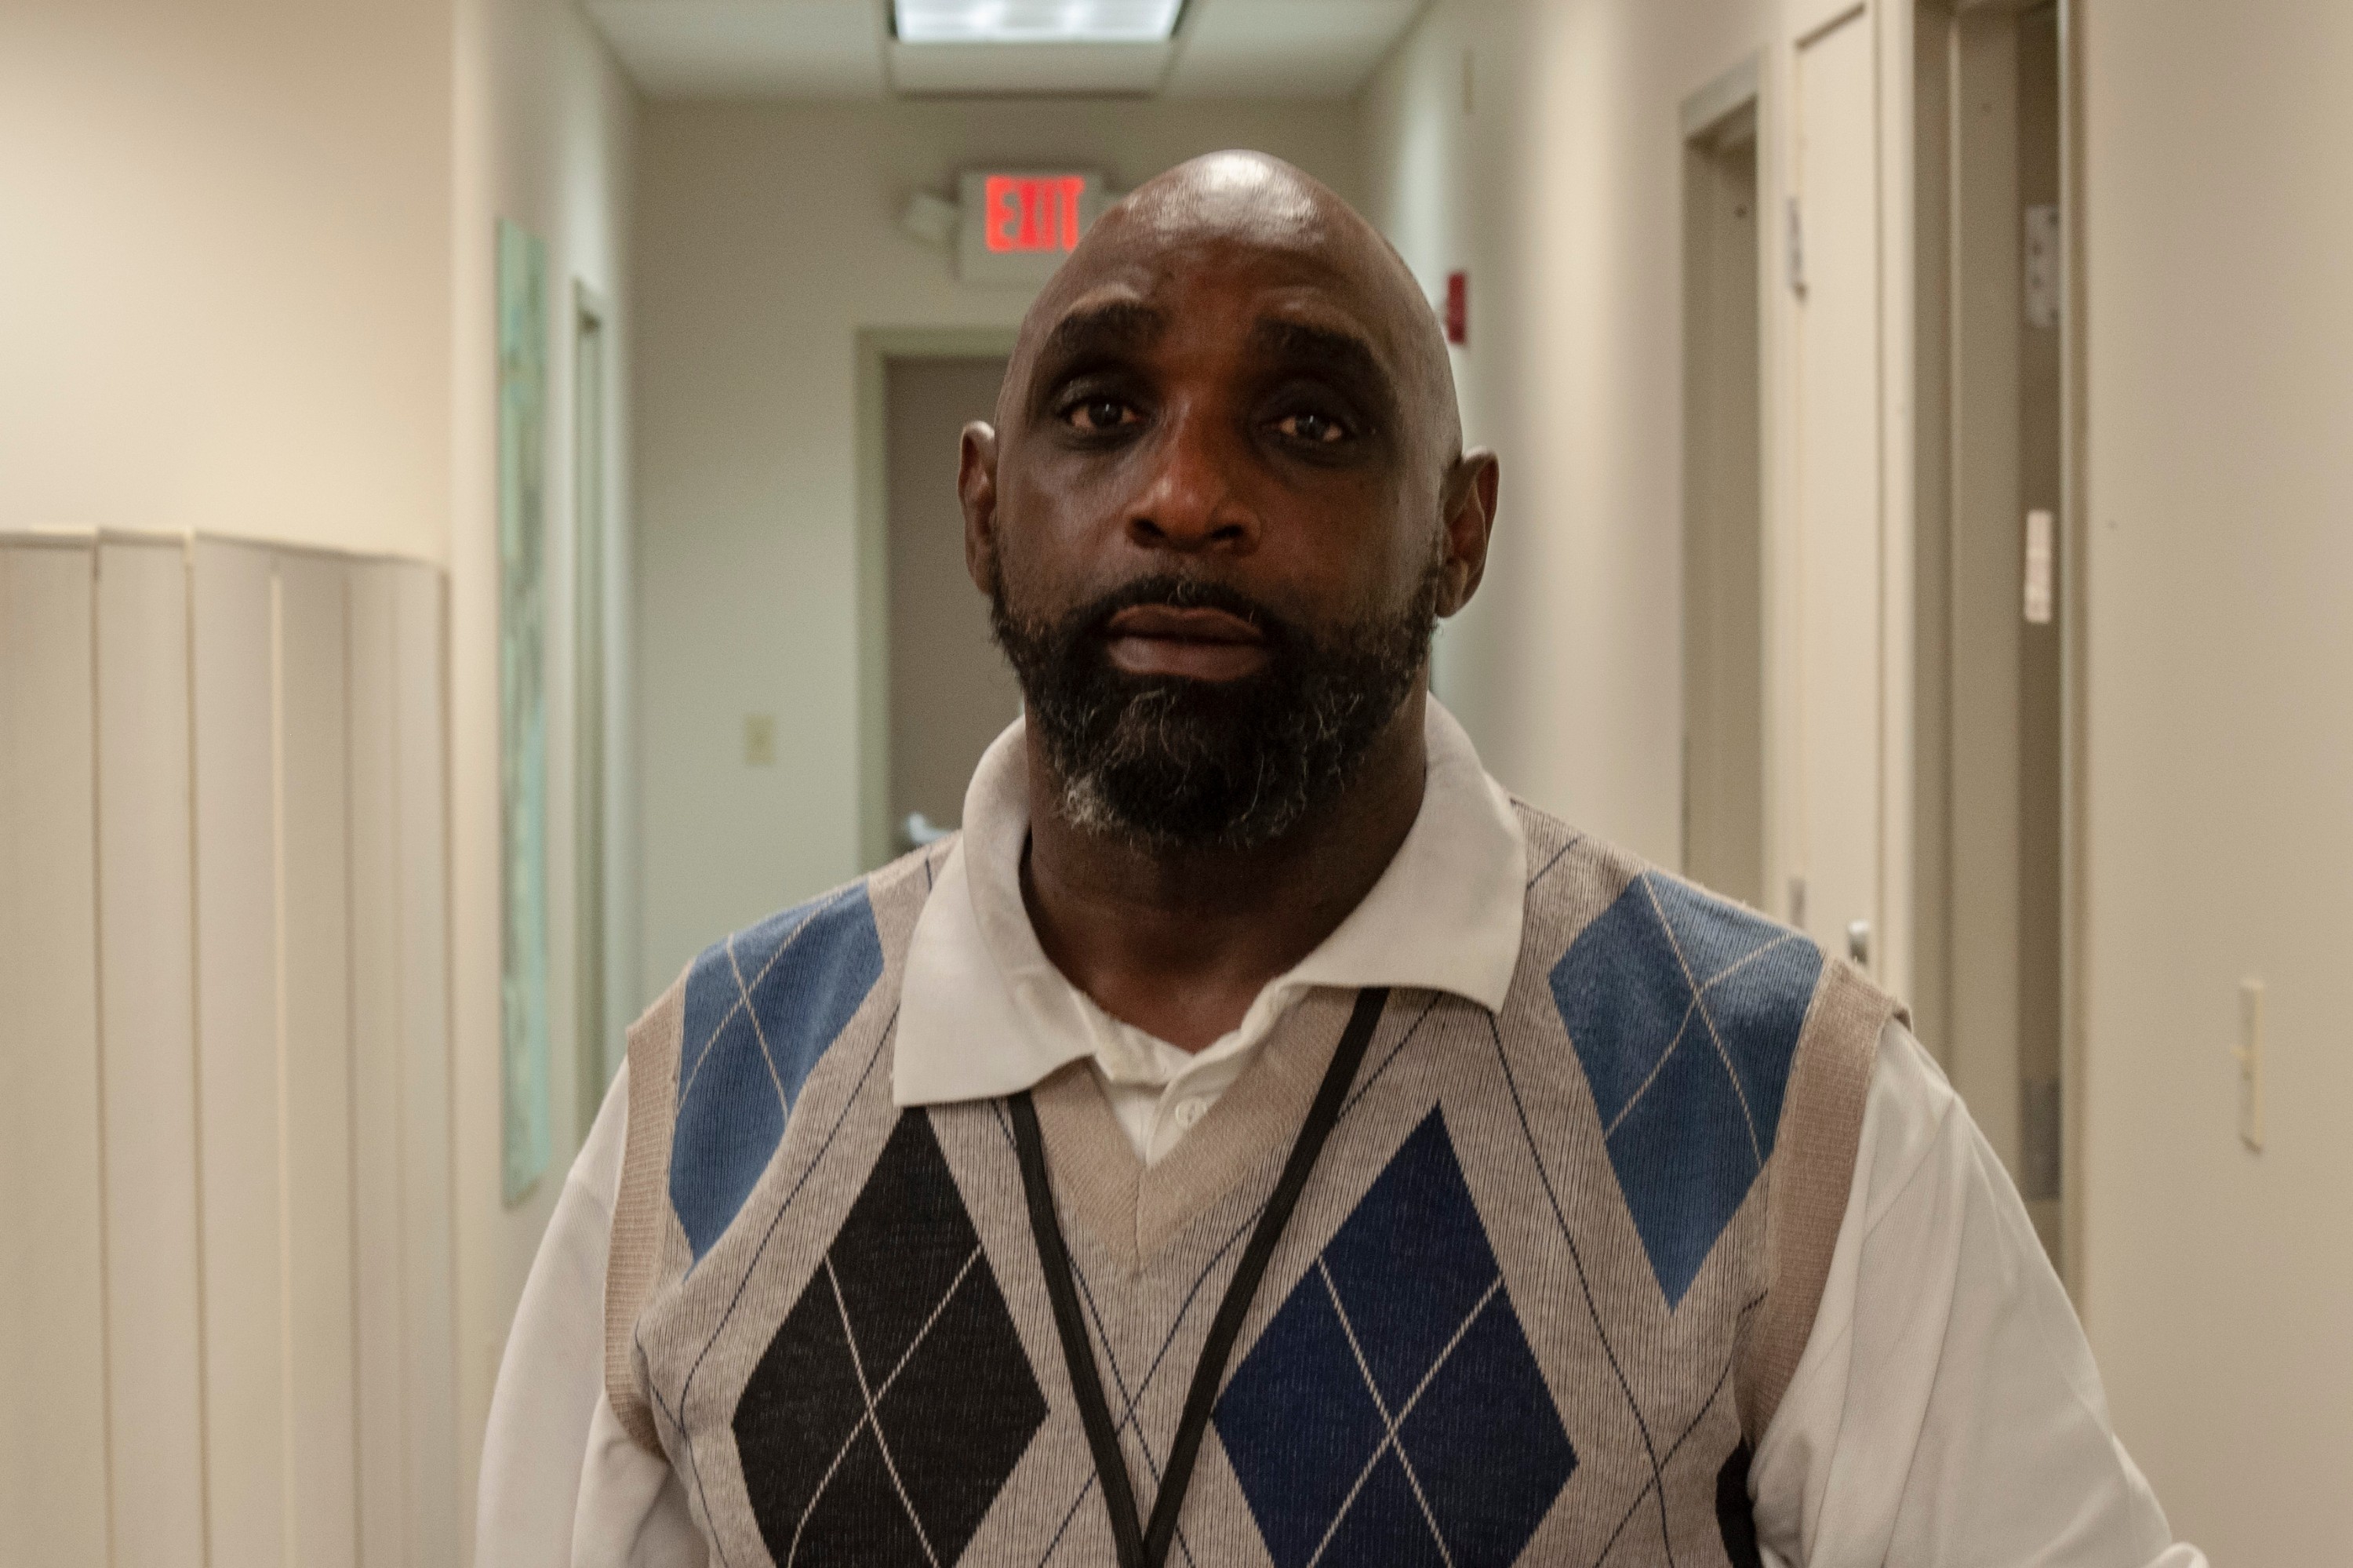 Charles Miller was sent to federal prison for a gun charge in 1994. In his fifties now, he’s been out of prison for eight years.